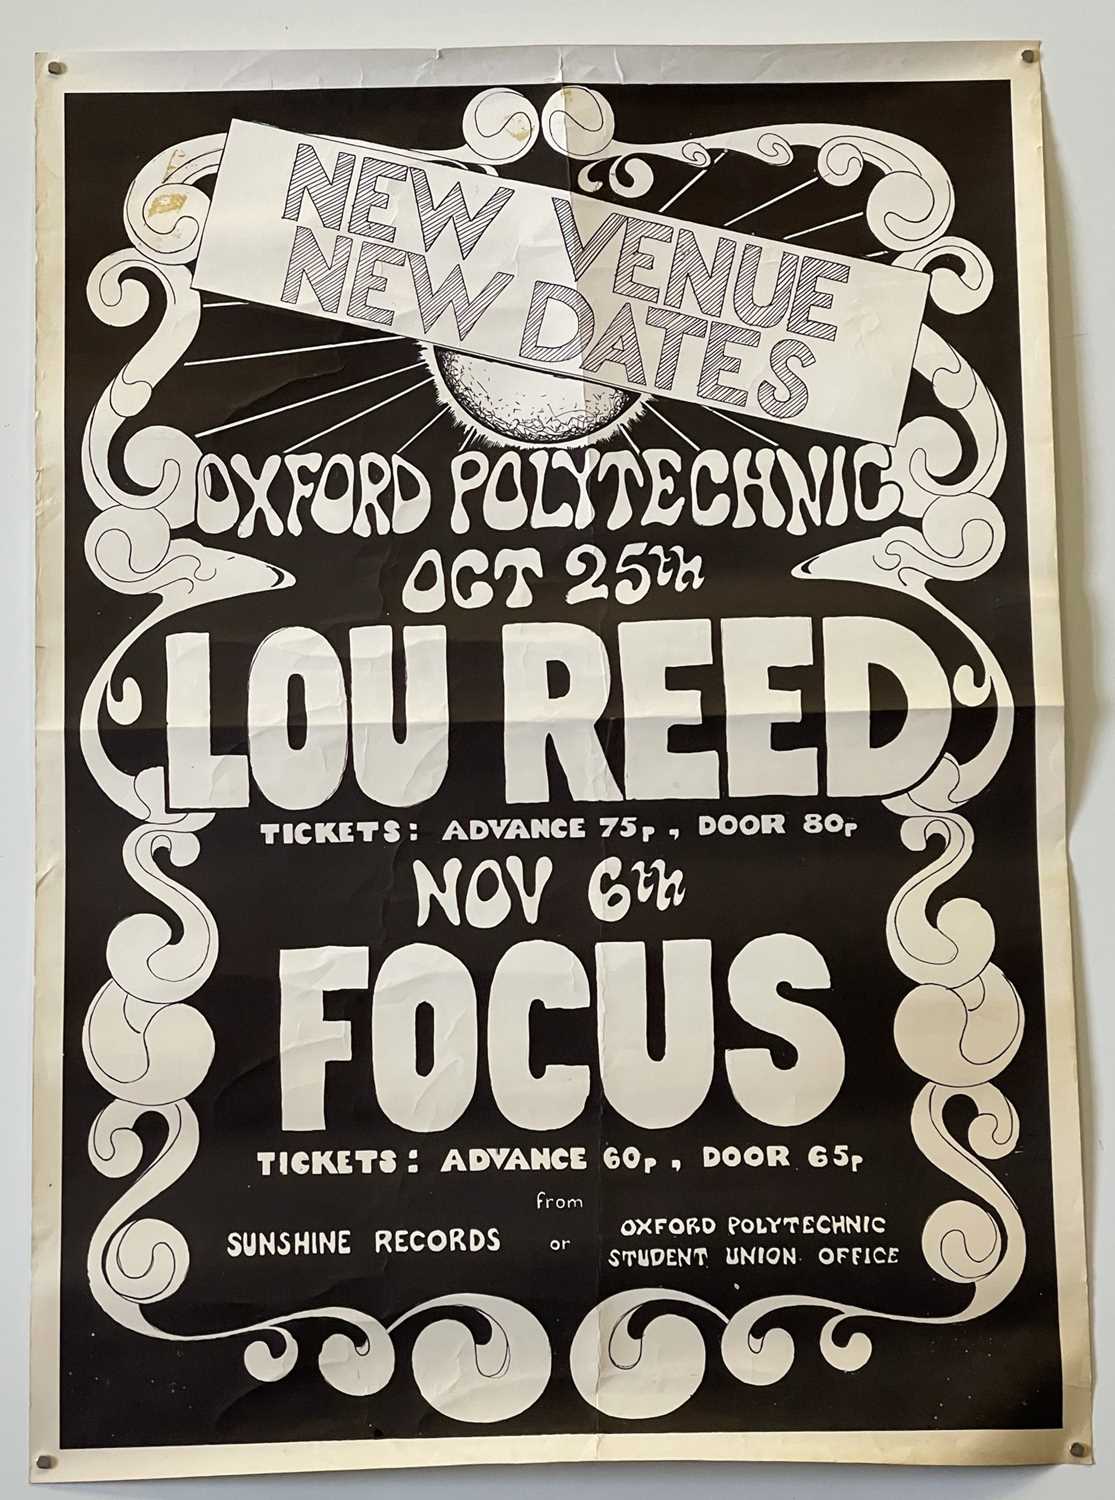 Lot 107 - LOU REED 1972 POSTER